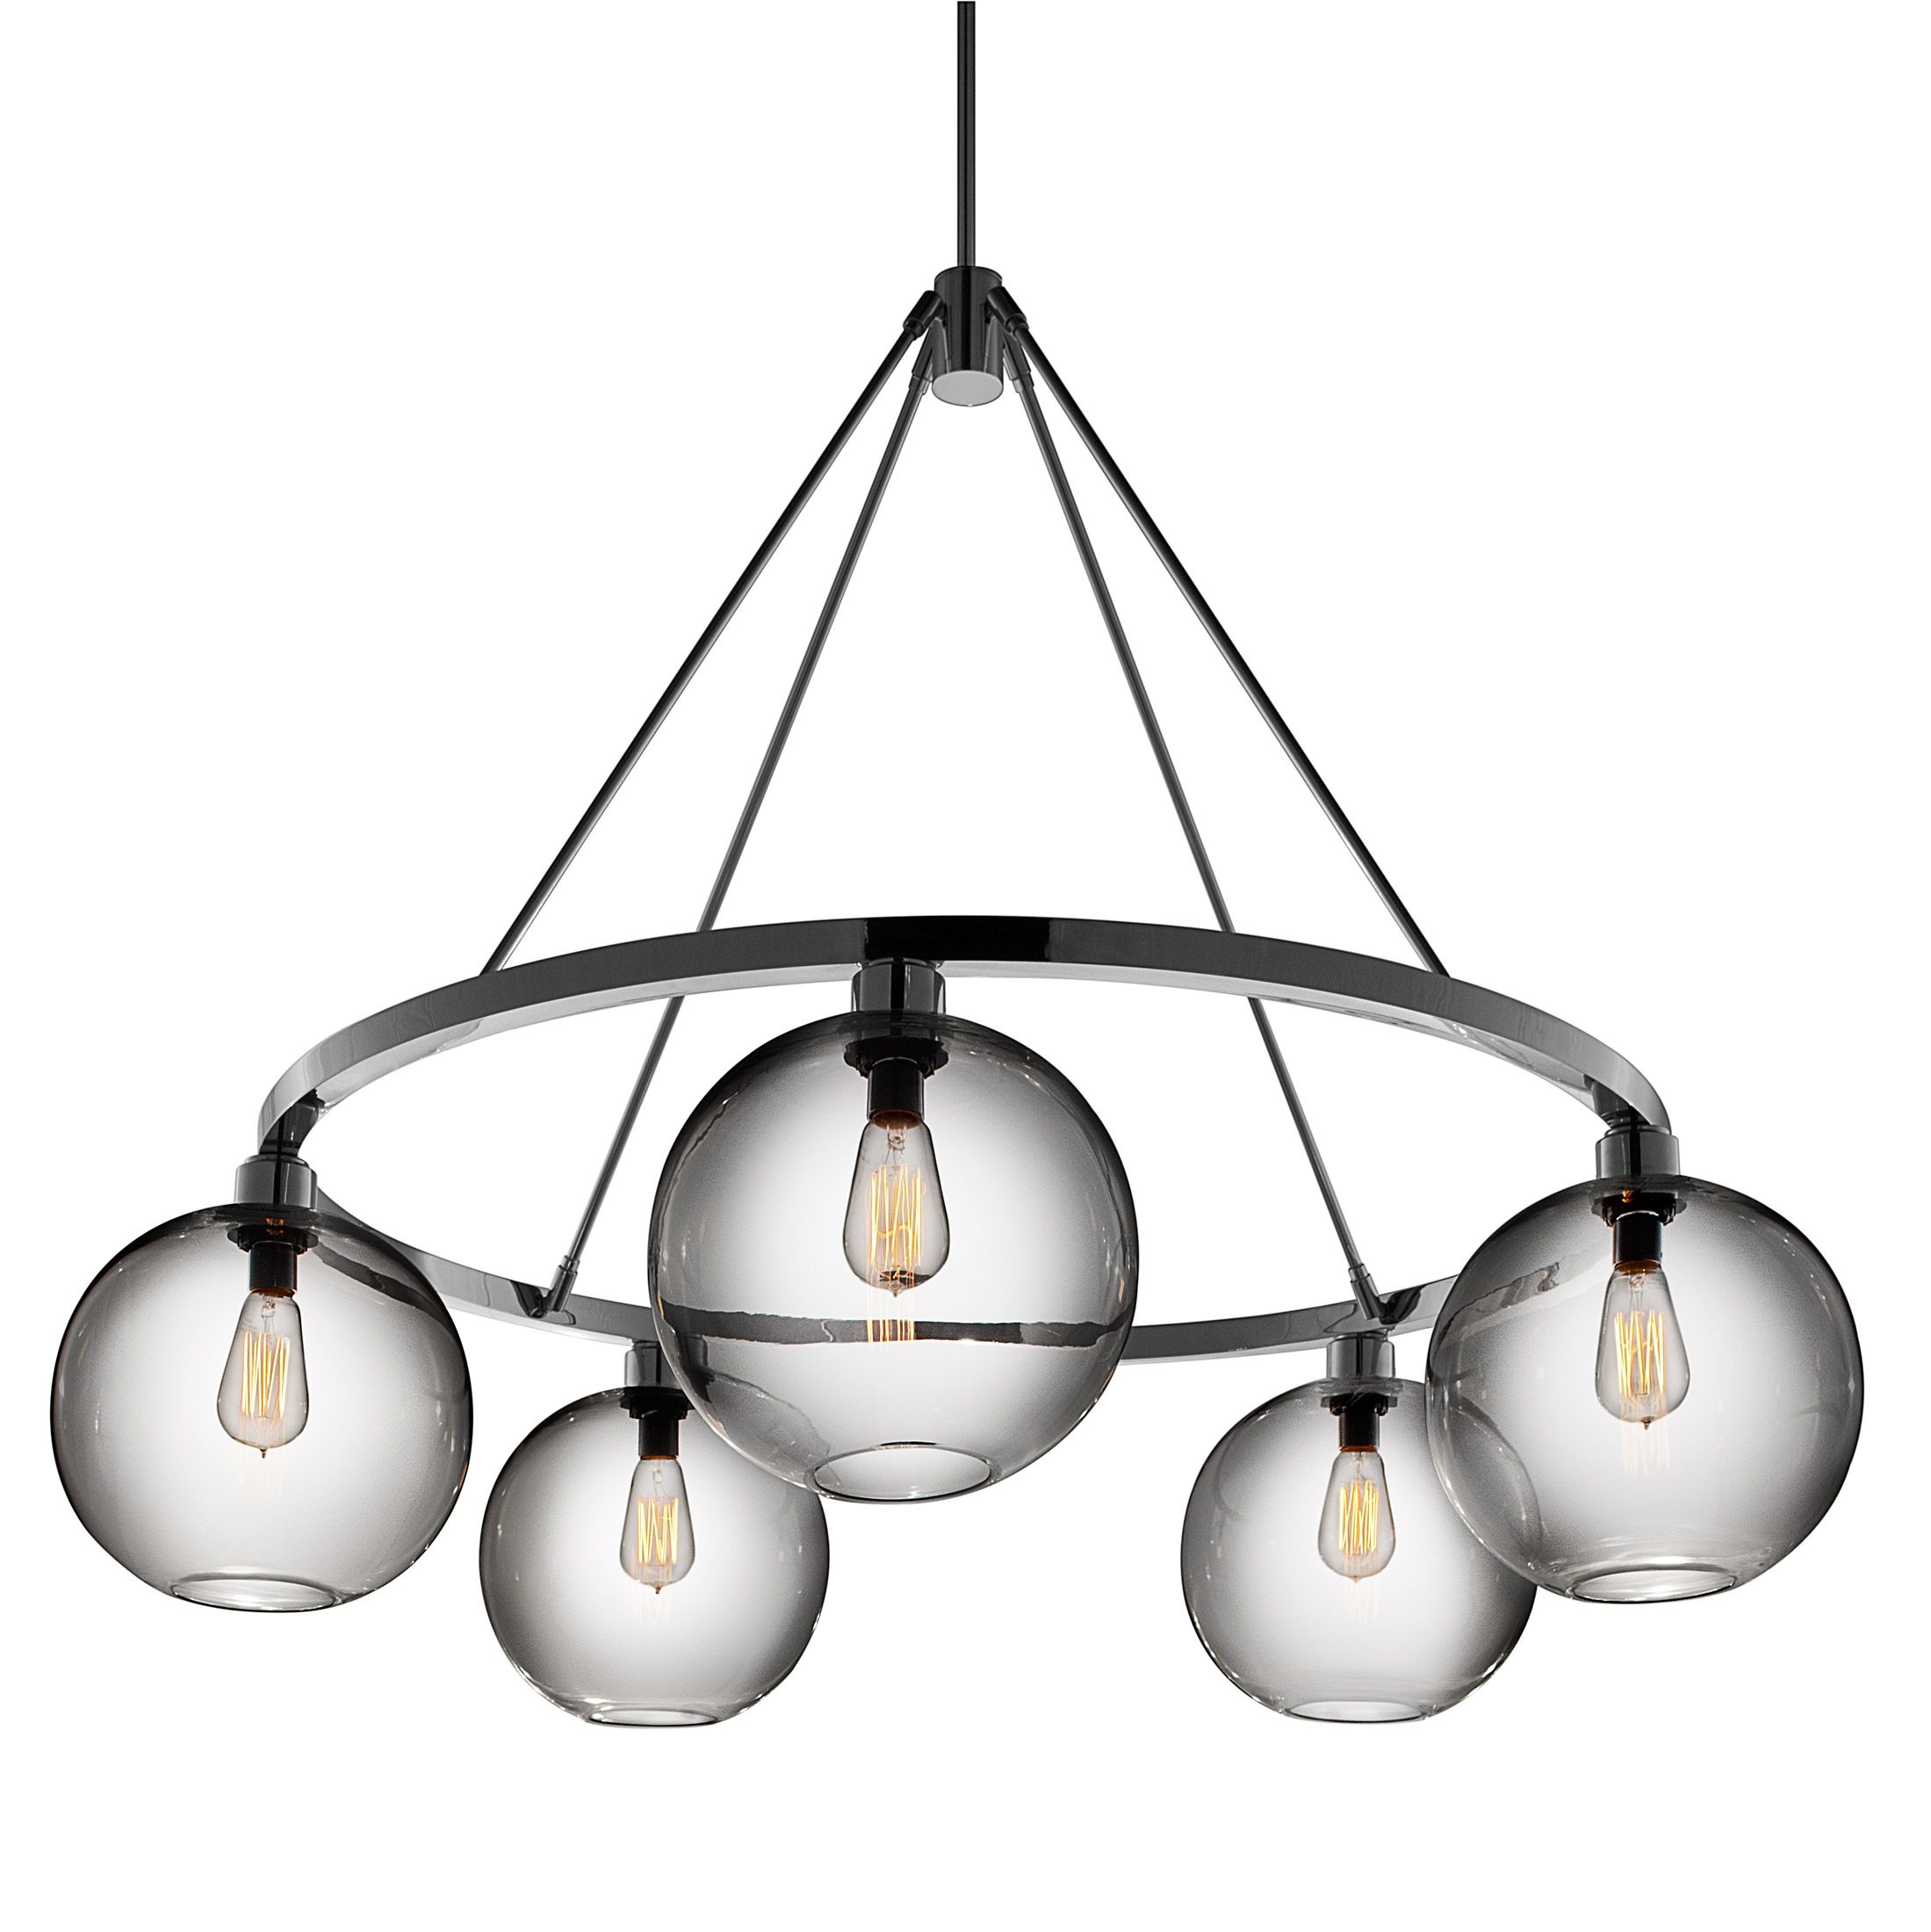 53 Modern Chandelier Lighting Chromecrystalmetal Bubble Shade Inside Contemporary Chandeliers (View 8 of 15)